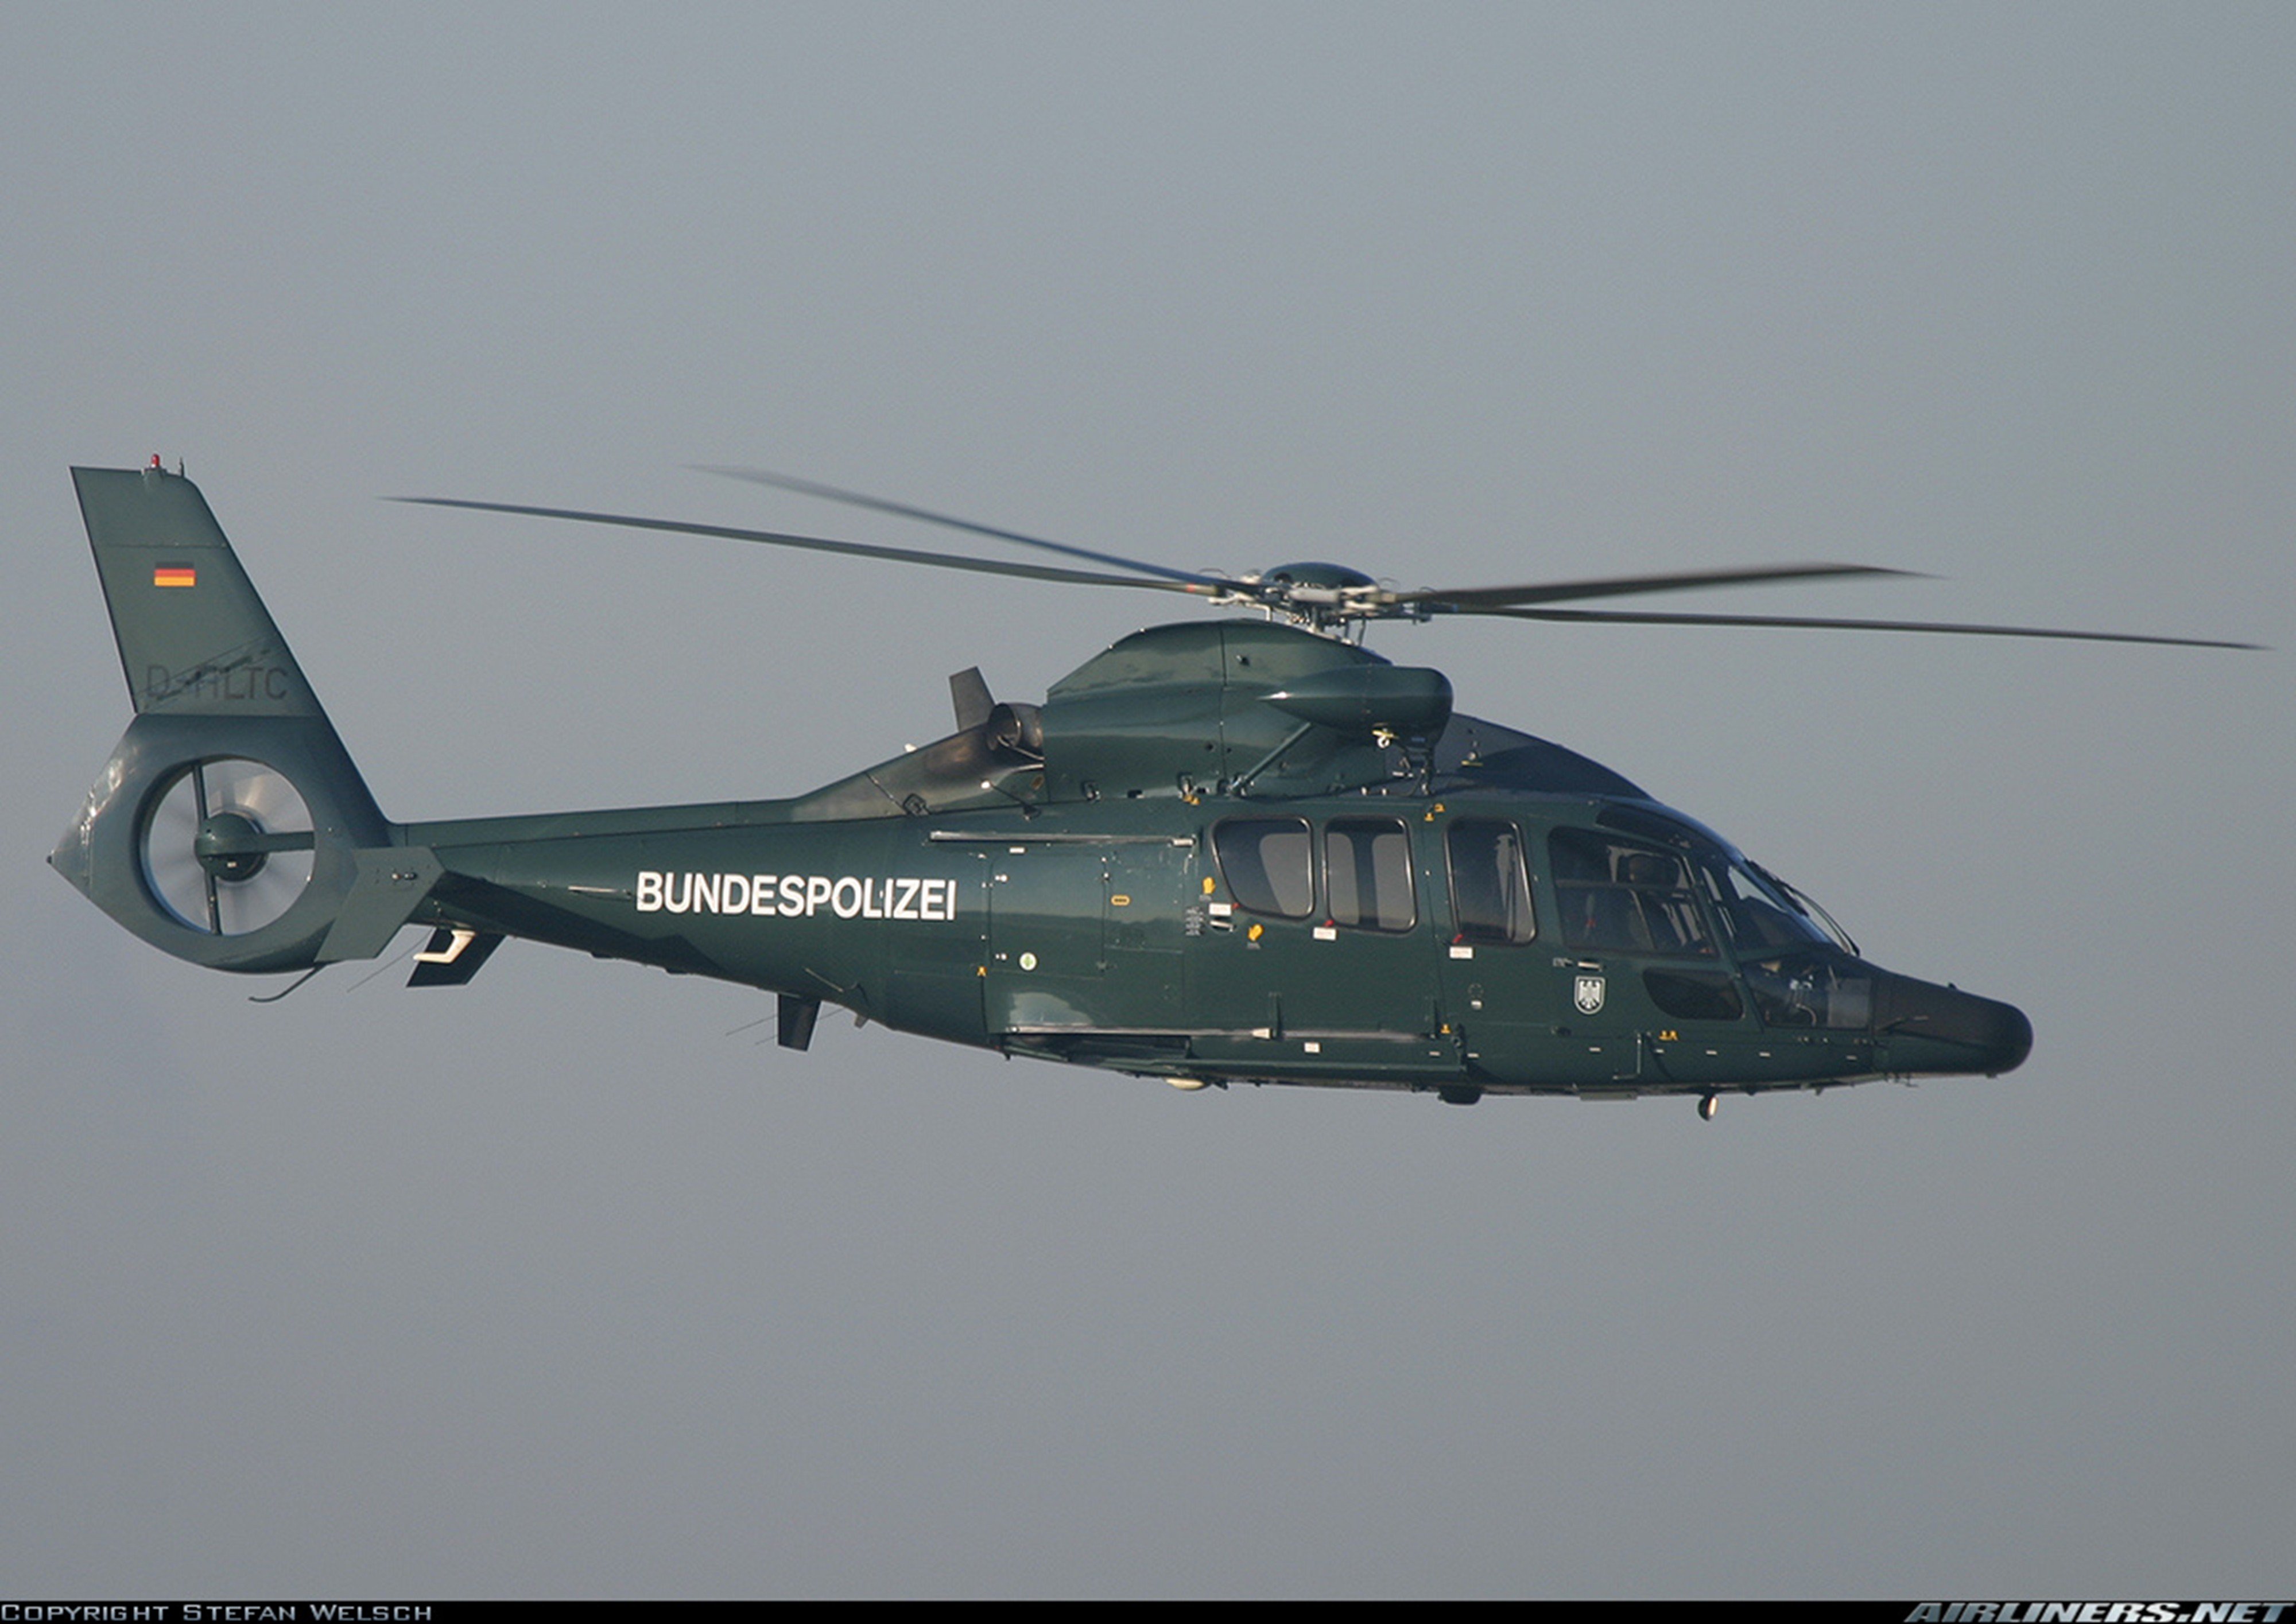 helicopter, Aircraft, Federal, Police, Bundspolizei, Germany Wallpaper